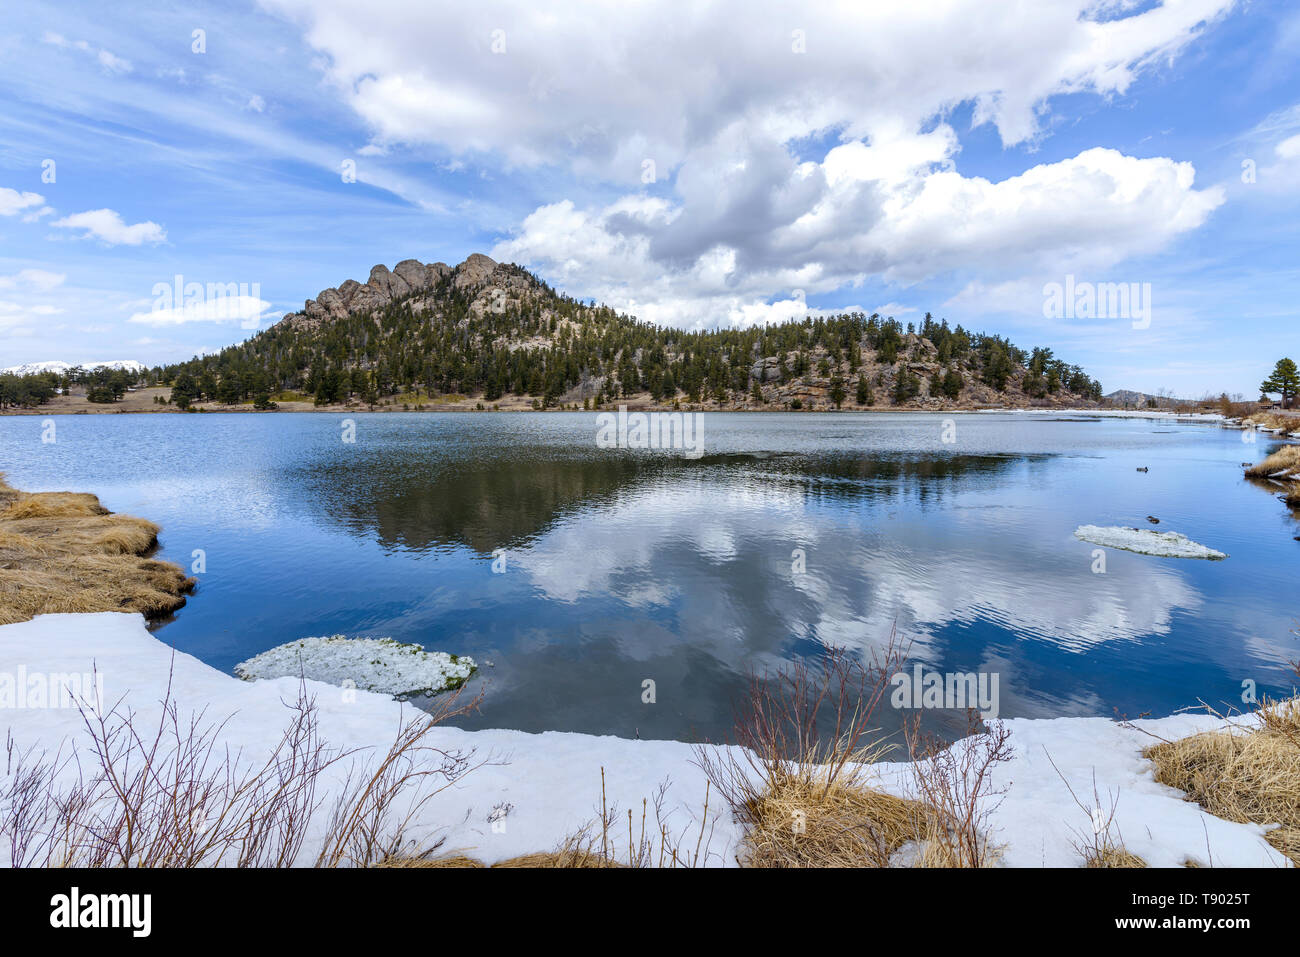 Feder an Lily See - ein Weitwinkel- Frühling Blick auf Lily See, Estes Park, Colorado, USA. Stockfoto